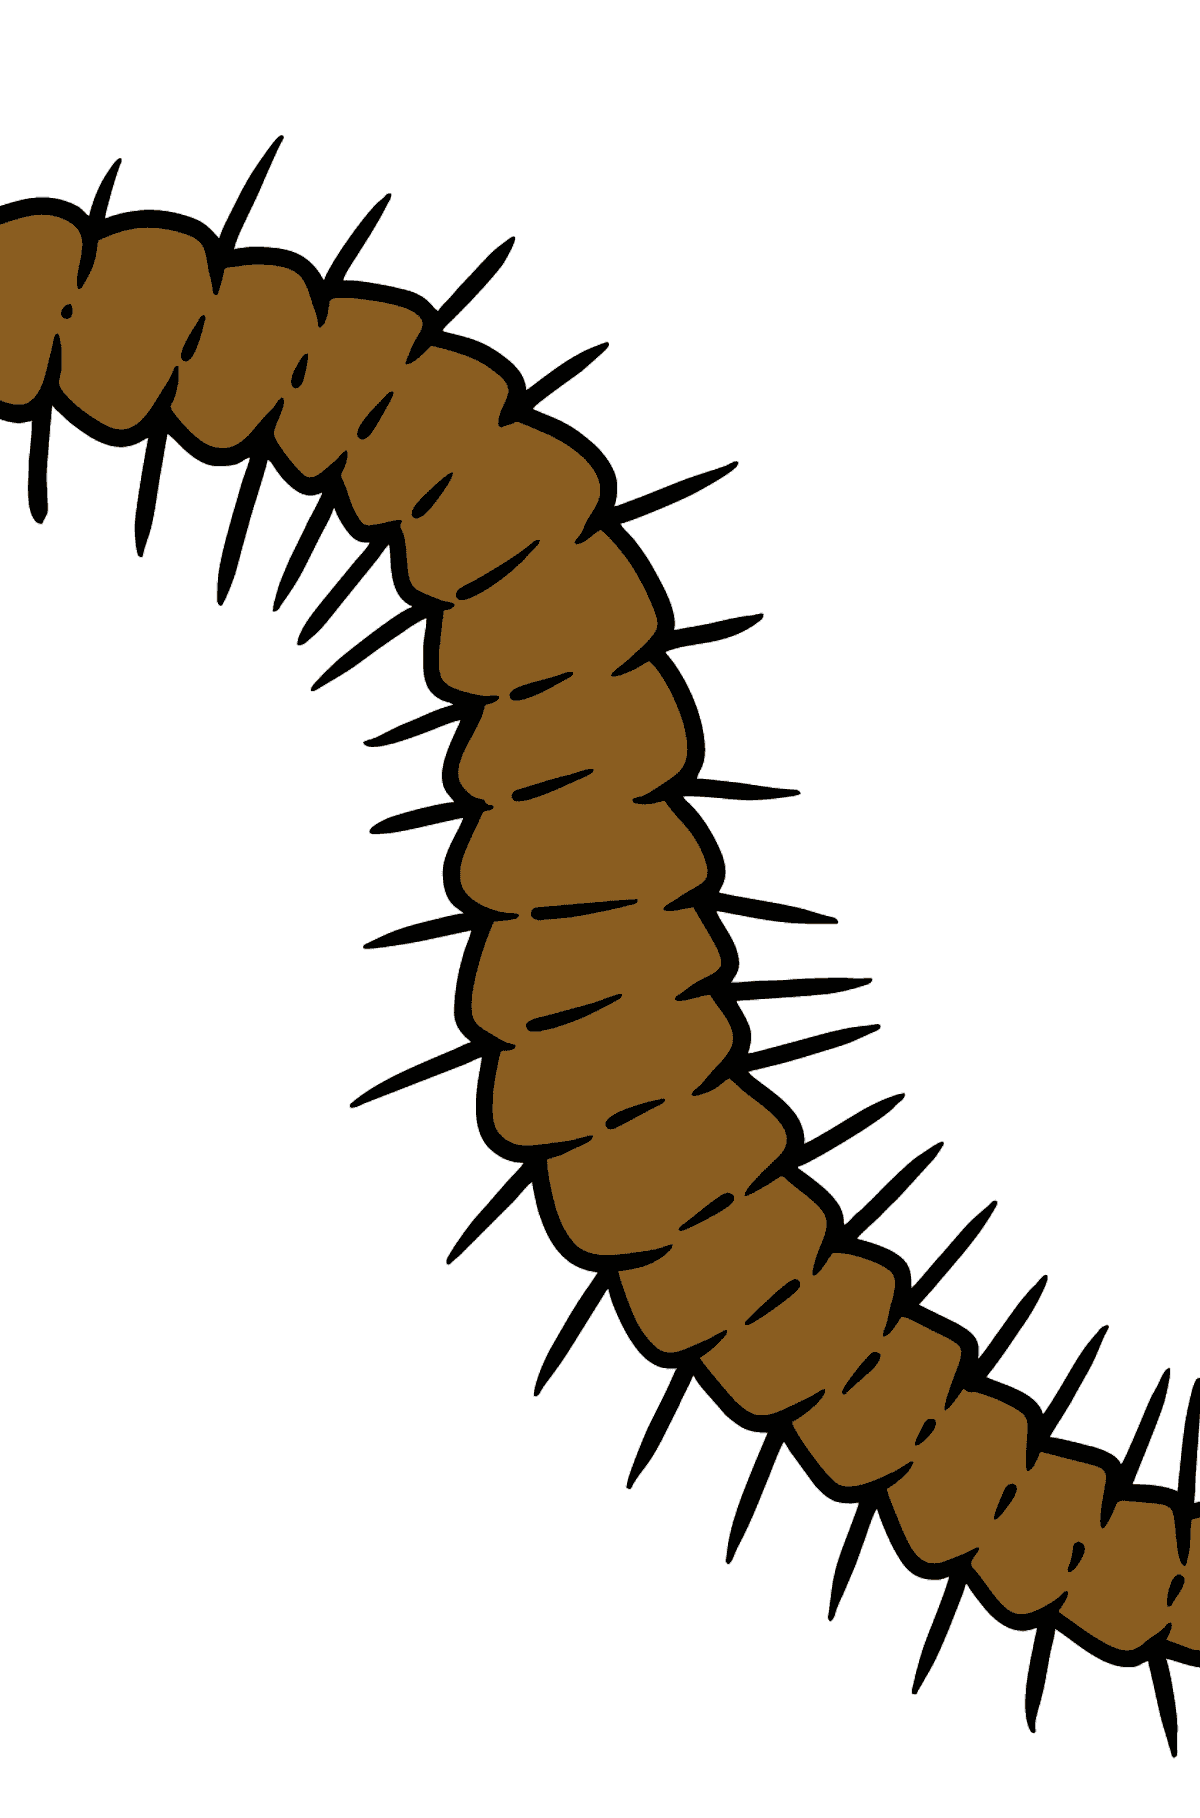 Centipede coloring page - Coloring Pages for Kids